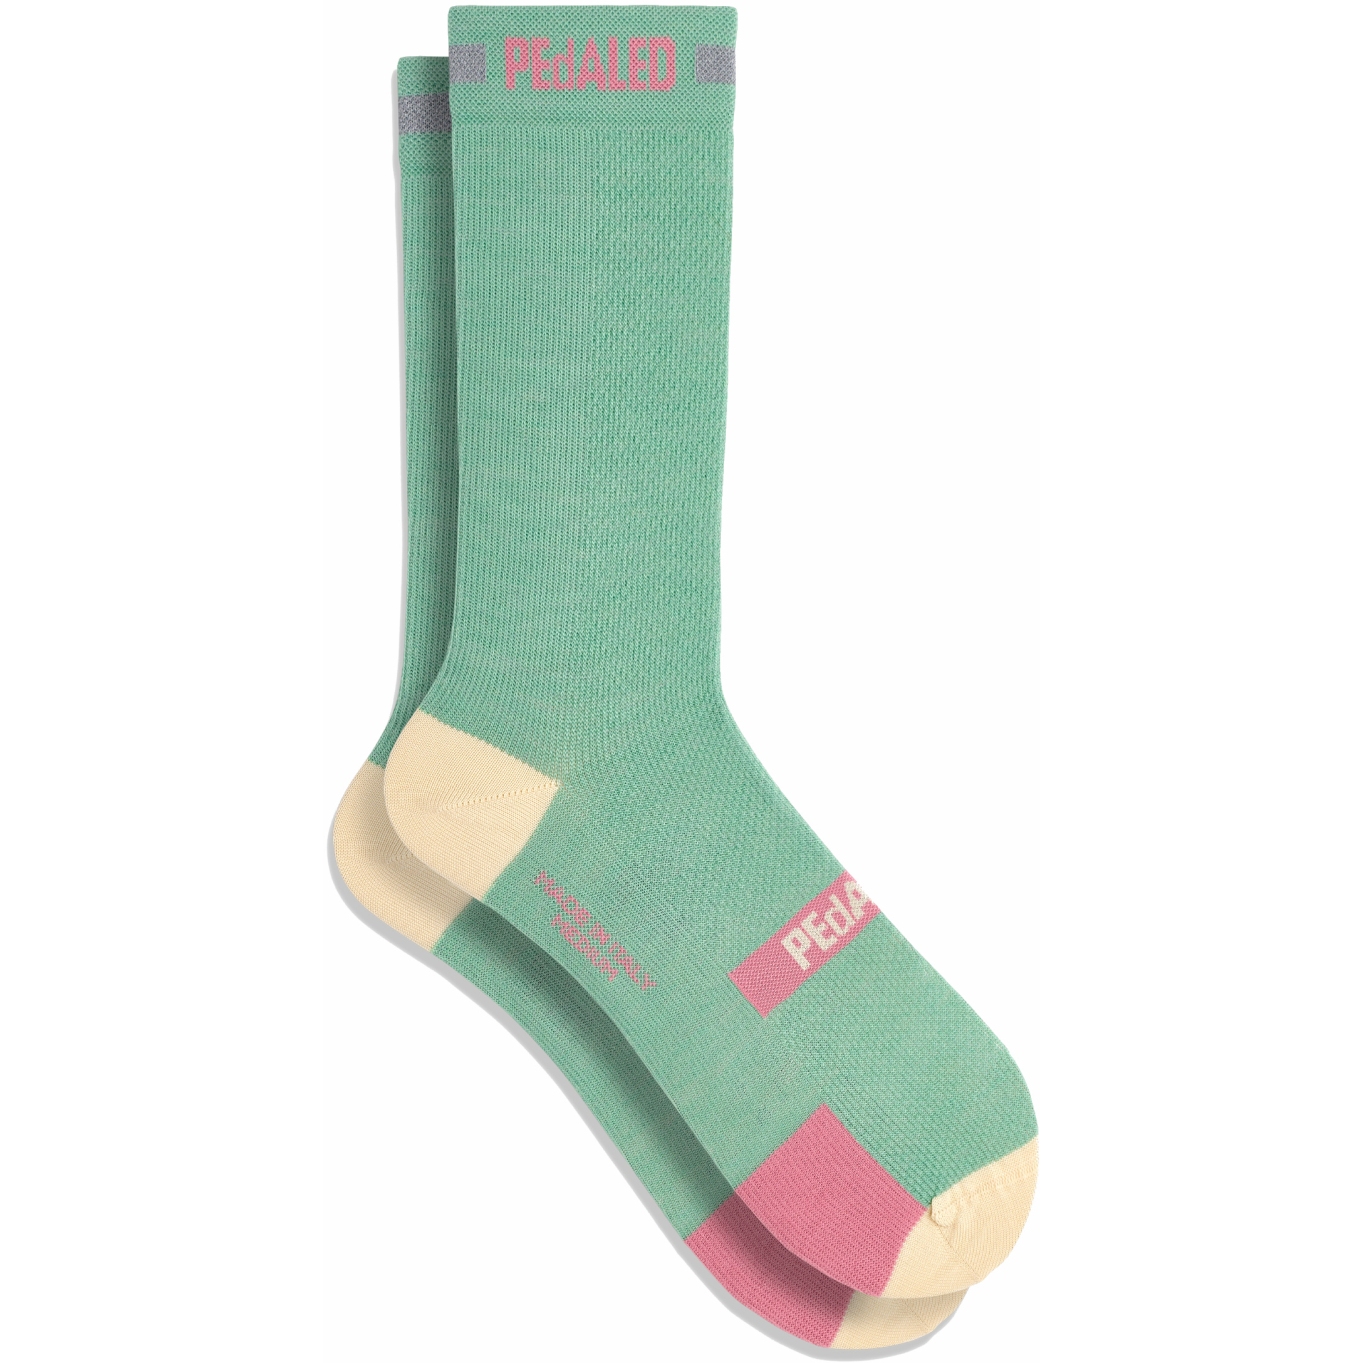 Picture of PEdALED Odyssey Merino Reflective Socks - Light Green